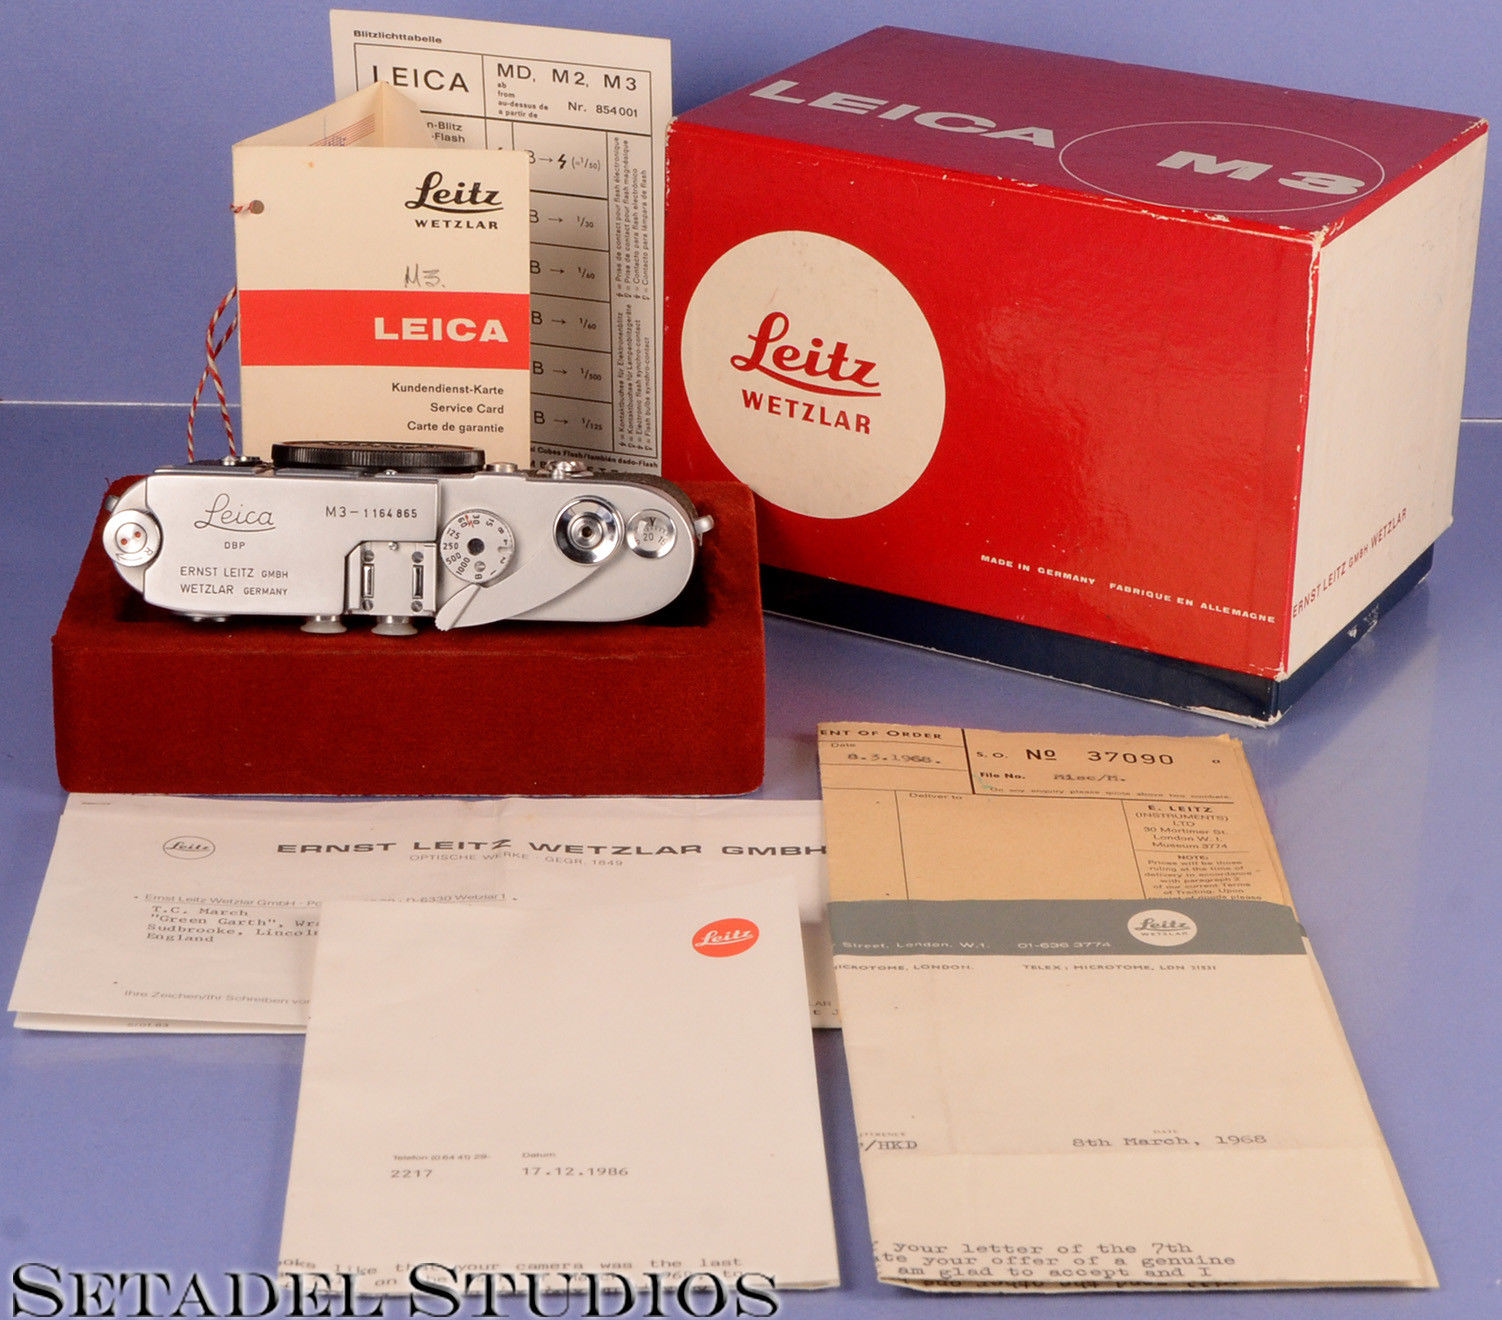 You Can Own the Last (and Most Expensive) Leica M3 Ever Made